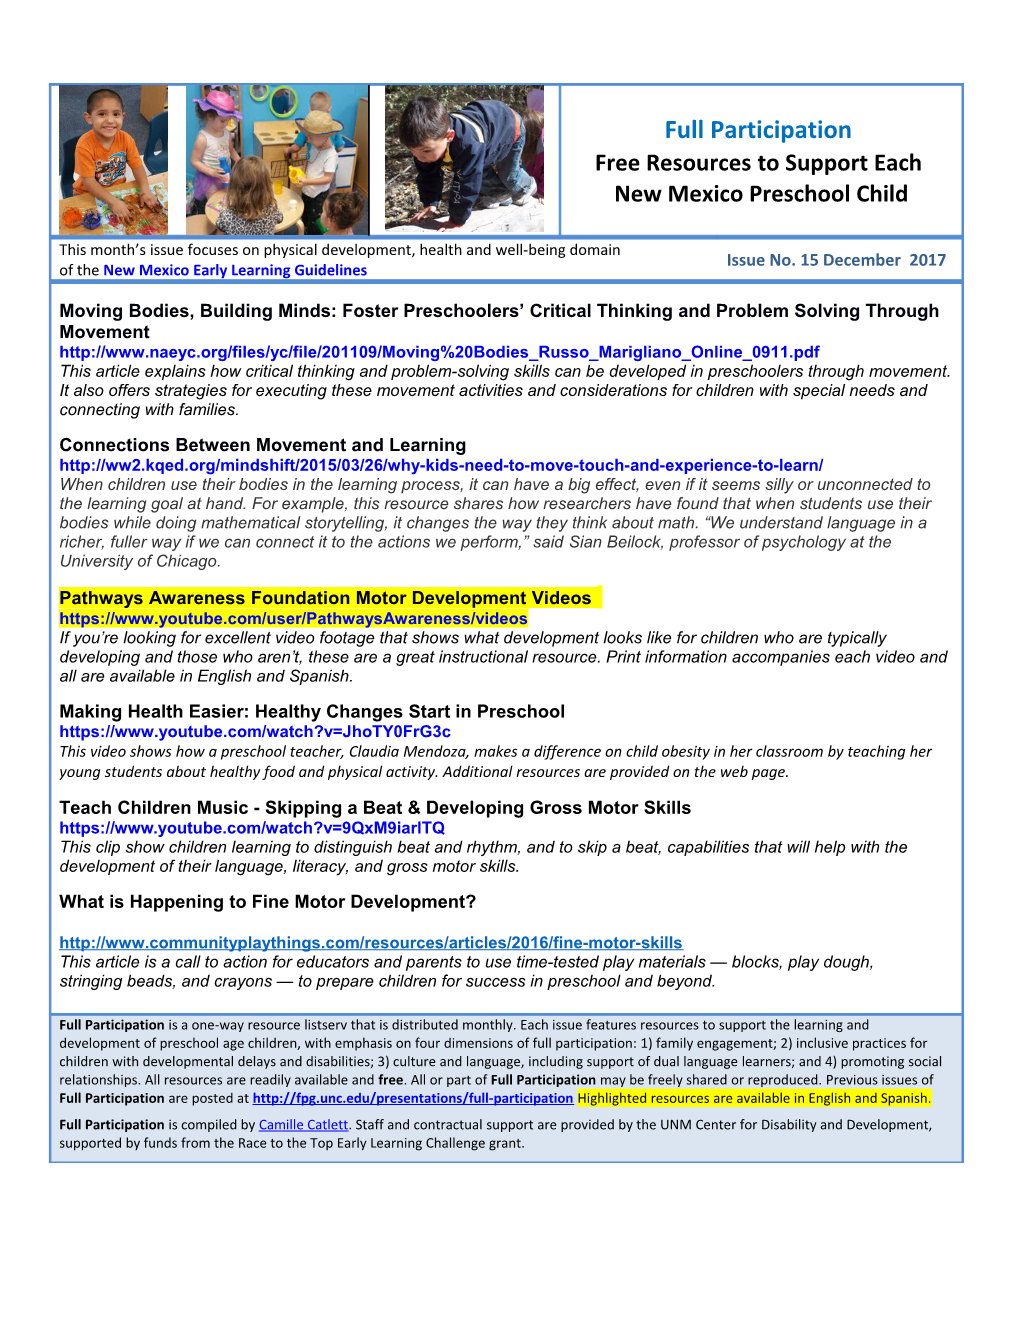 Full Participation Free Resources to Support Each New Mexico Preschool Child